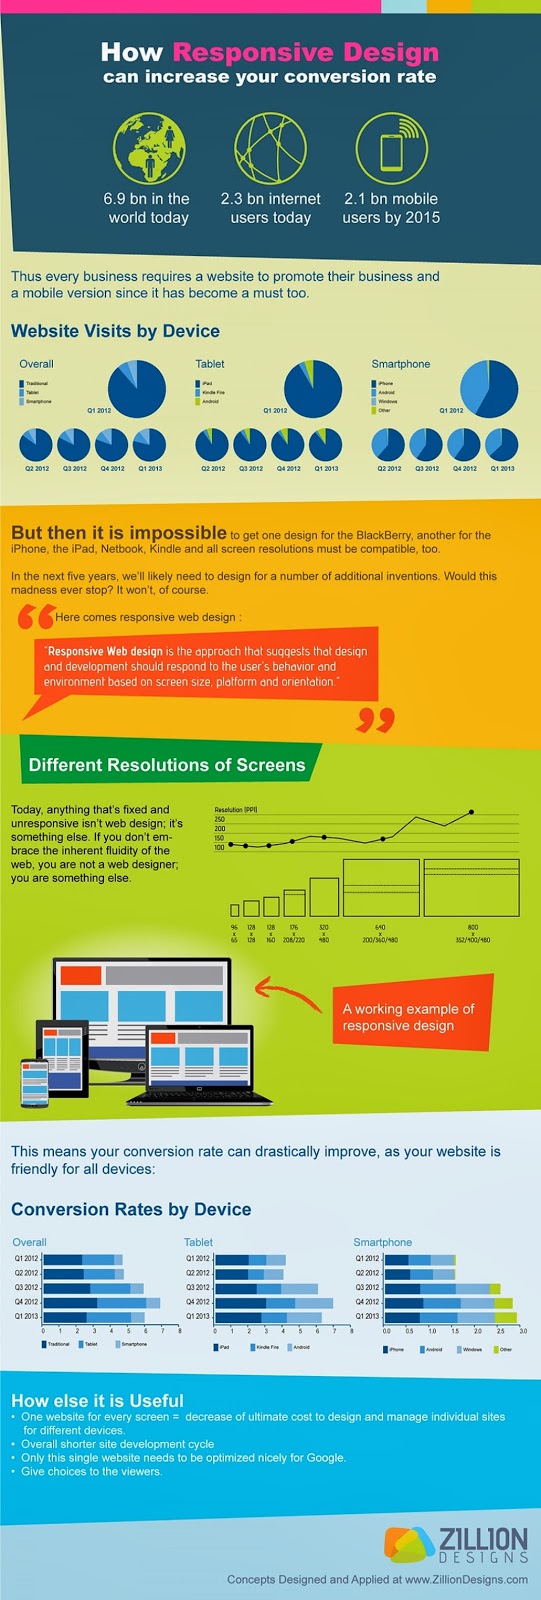 How Responsive Design Can Effect Your Conversion Rate